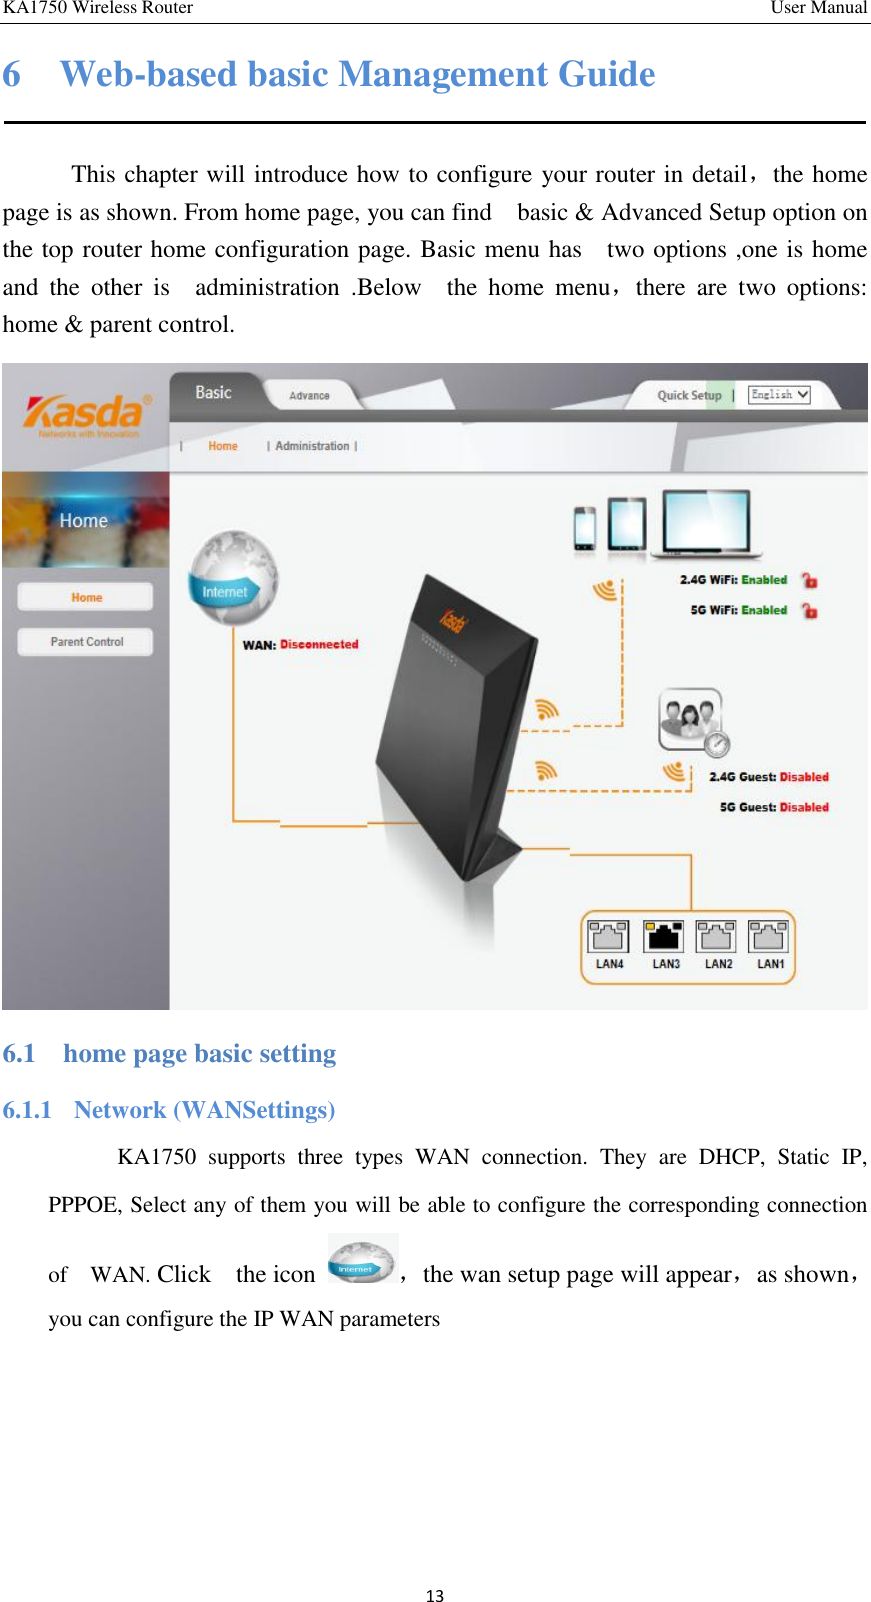 KA1750 Wireless Router       User Manual 13 6    Web-based basic Management Guide   This chapter will introduce how to configure your router in detail，the home page is as shown. From home page, you can find    basic &amp; Advanced Setup option on the top router home configuration page. Basic menu has    two options ,one is home and  the  other  is    administration  .Below    the  home  menu，there  are  two  options: home &amp; parent control.    6.1  home page basic setting 6.1.1  Network (WANSettings) KA1750  supports  three  types  WAN  connection.  They  are  DHCP,  Static  IP, PPPOE, Select any of them you will be able to configure the corresponding connection of    WAN. Click    the icon  ，the wan setup page will appear，as shown，you can configure the IP WAN parameters  